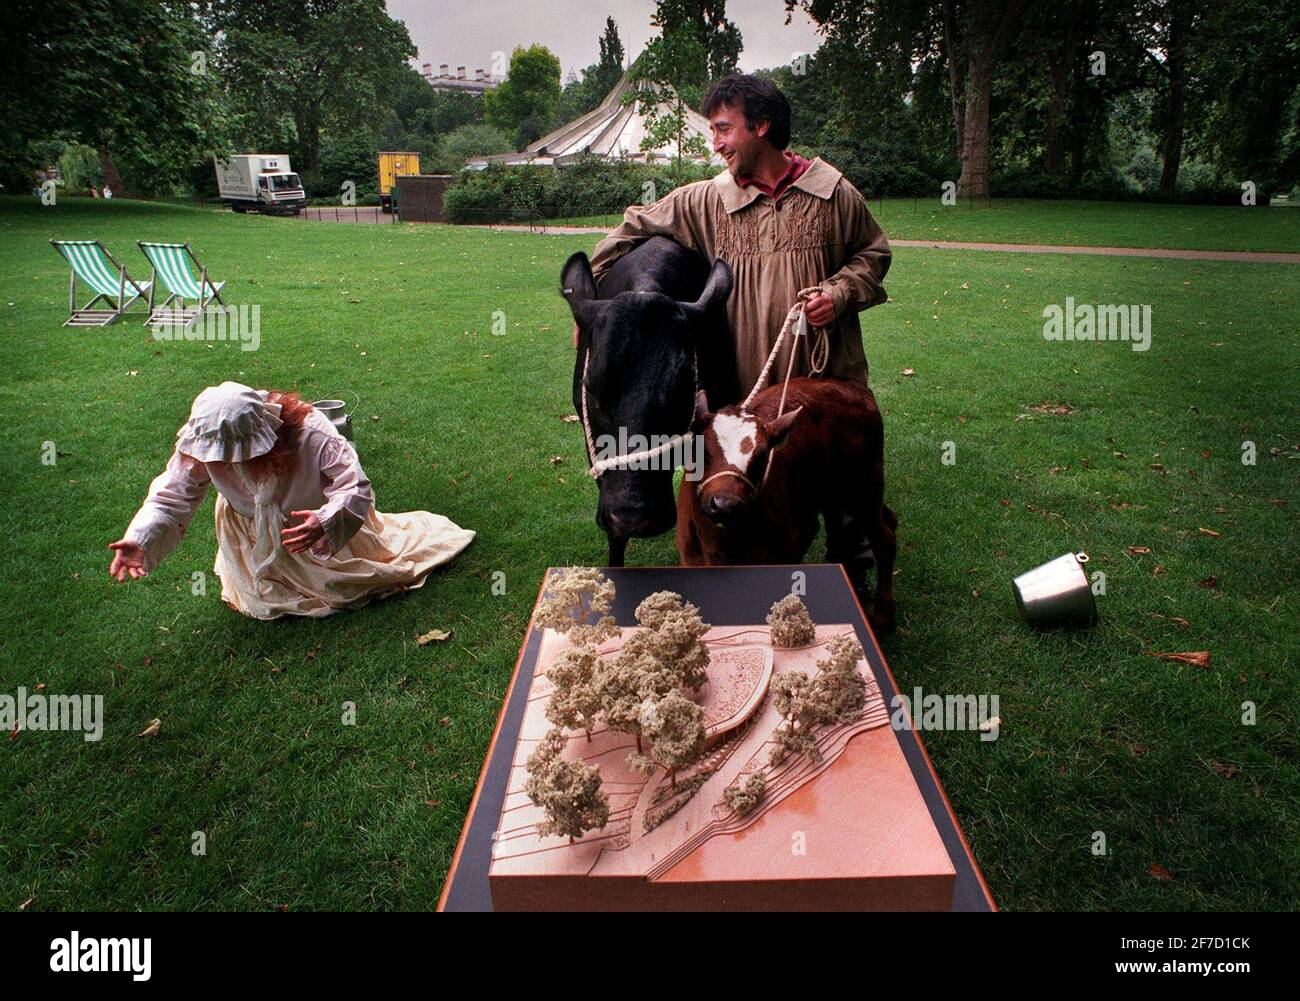 ST JAMES'S PARK  RECEPTIONIST LEE CULLEN JULY 1998AKA THE MILKMAID IS SENT FLYING WITH A WELL AIMED KICK FROM POPPY THE COW, AT A PHOTO CALL TO ANNOUNCE DETAILS OF AN INNOVATIVE NEW RESTURANT IN ST JAMES'S PARK  TO REPLACE THE OLD ONE SEEN IN THE BACKGROUND OF THE PICTURE Stock Photo